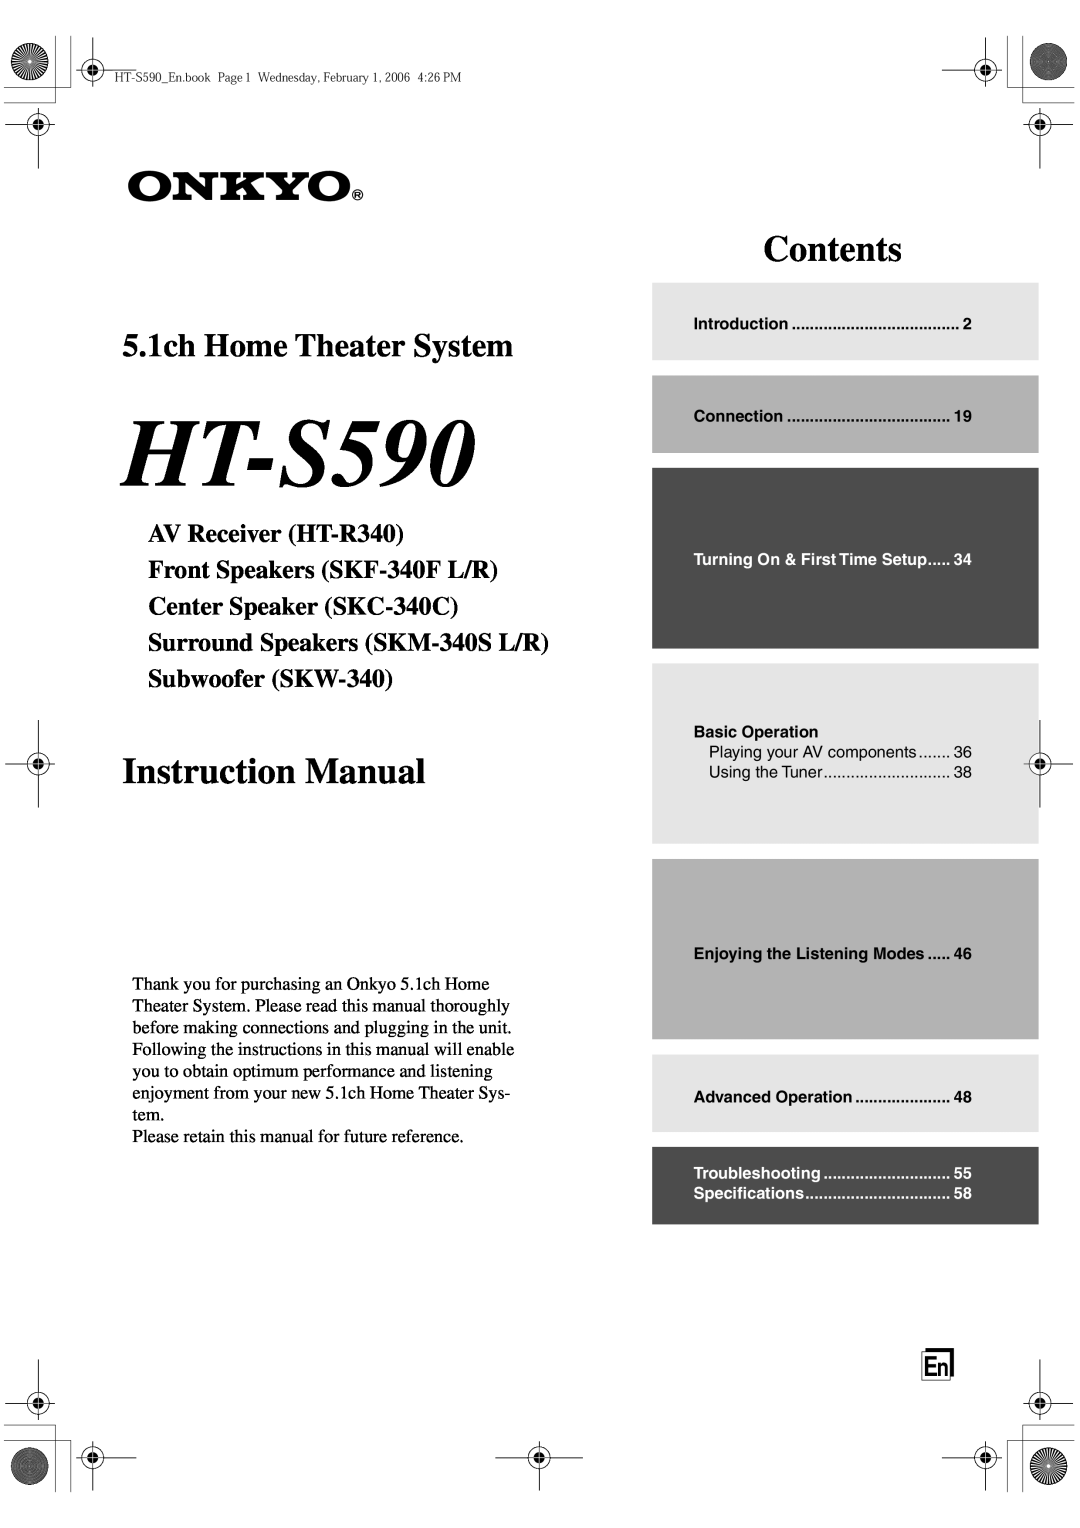 Onkyo SKF-340F, SKM-340S, SKW-340 instruction manual HT-S590, Contents, 5.1ch Home Theater System, Center Speaker SKC-340C 